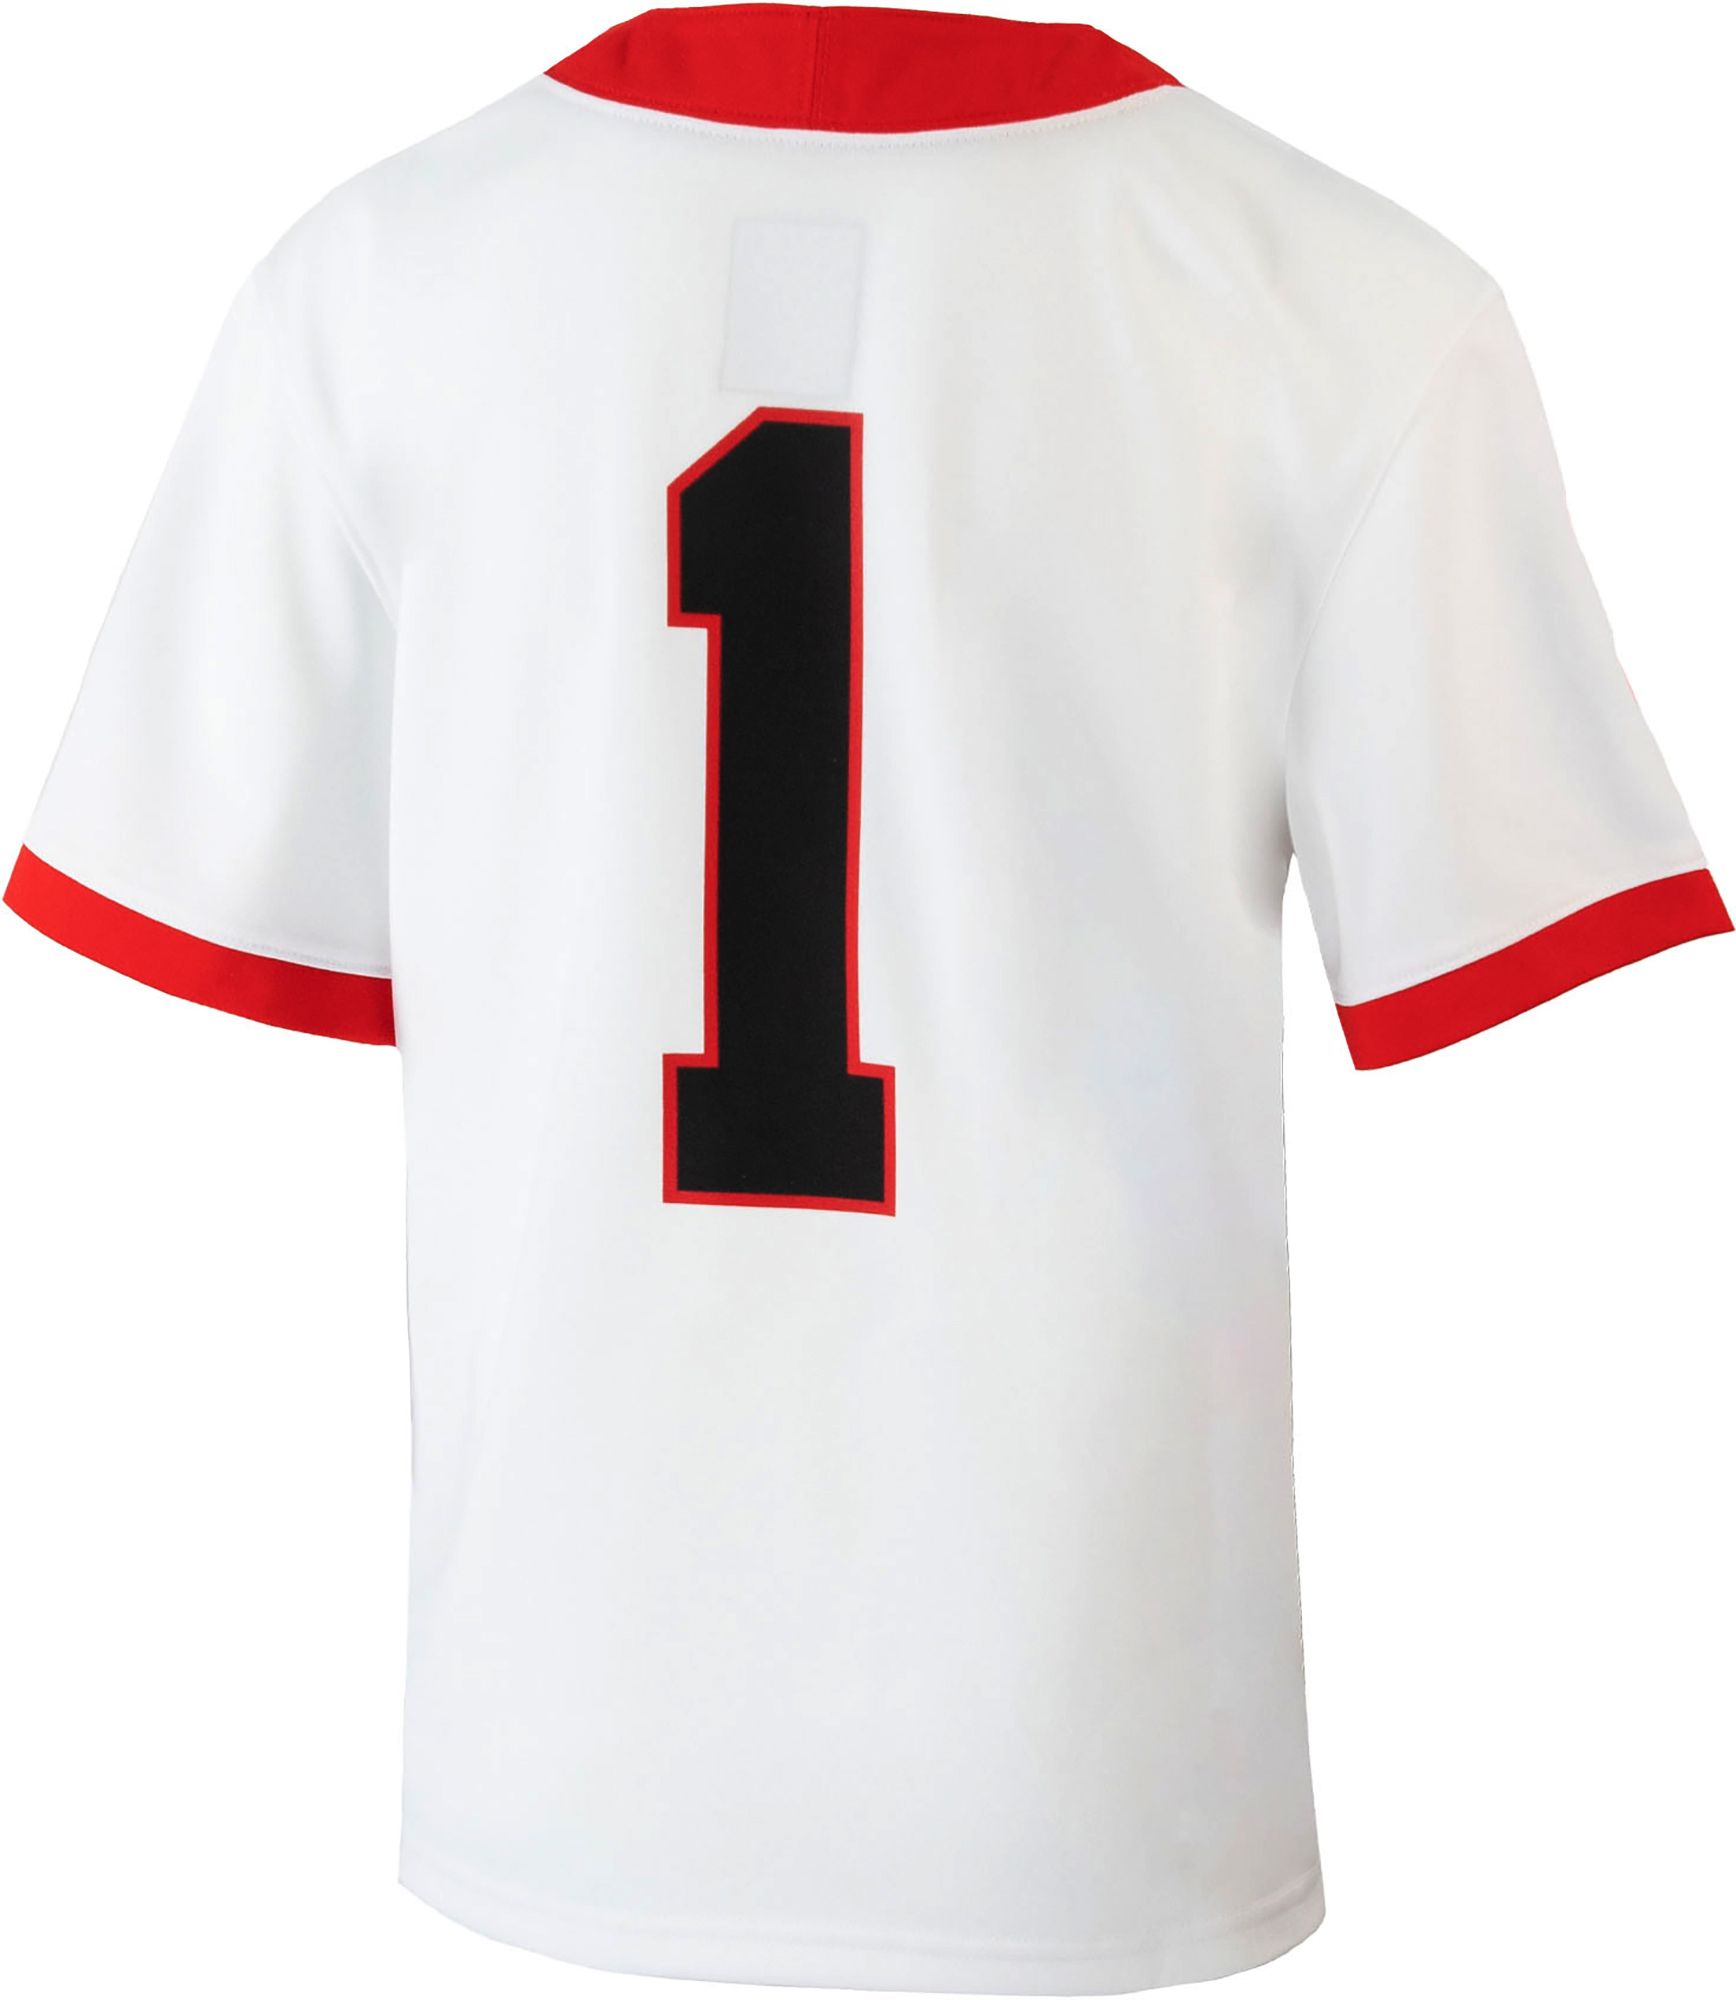 Bulldogs soccer jersey numbers